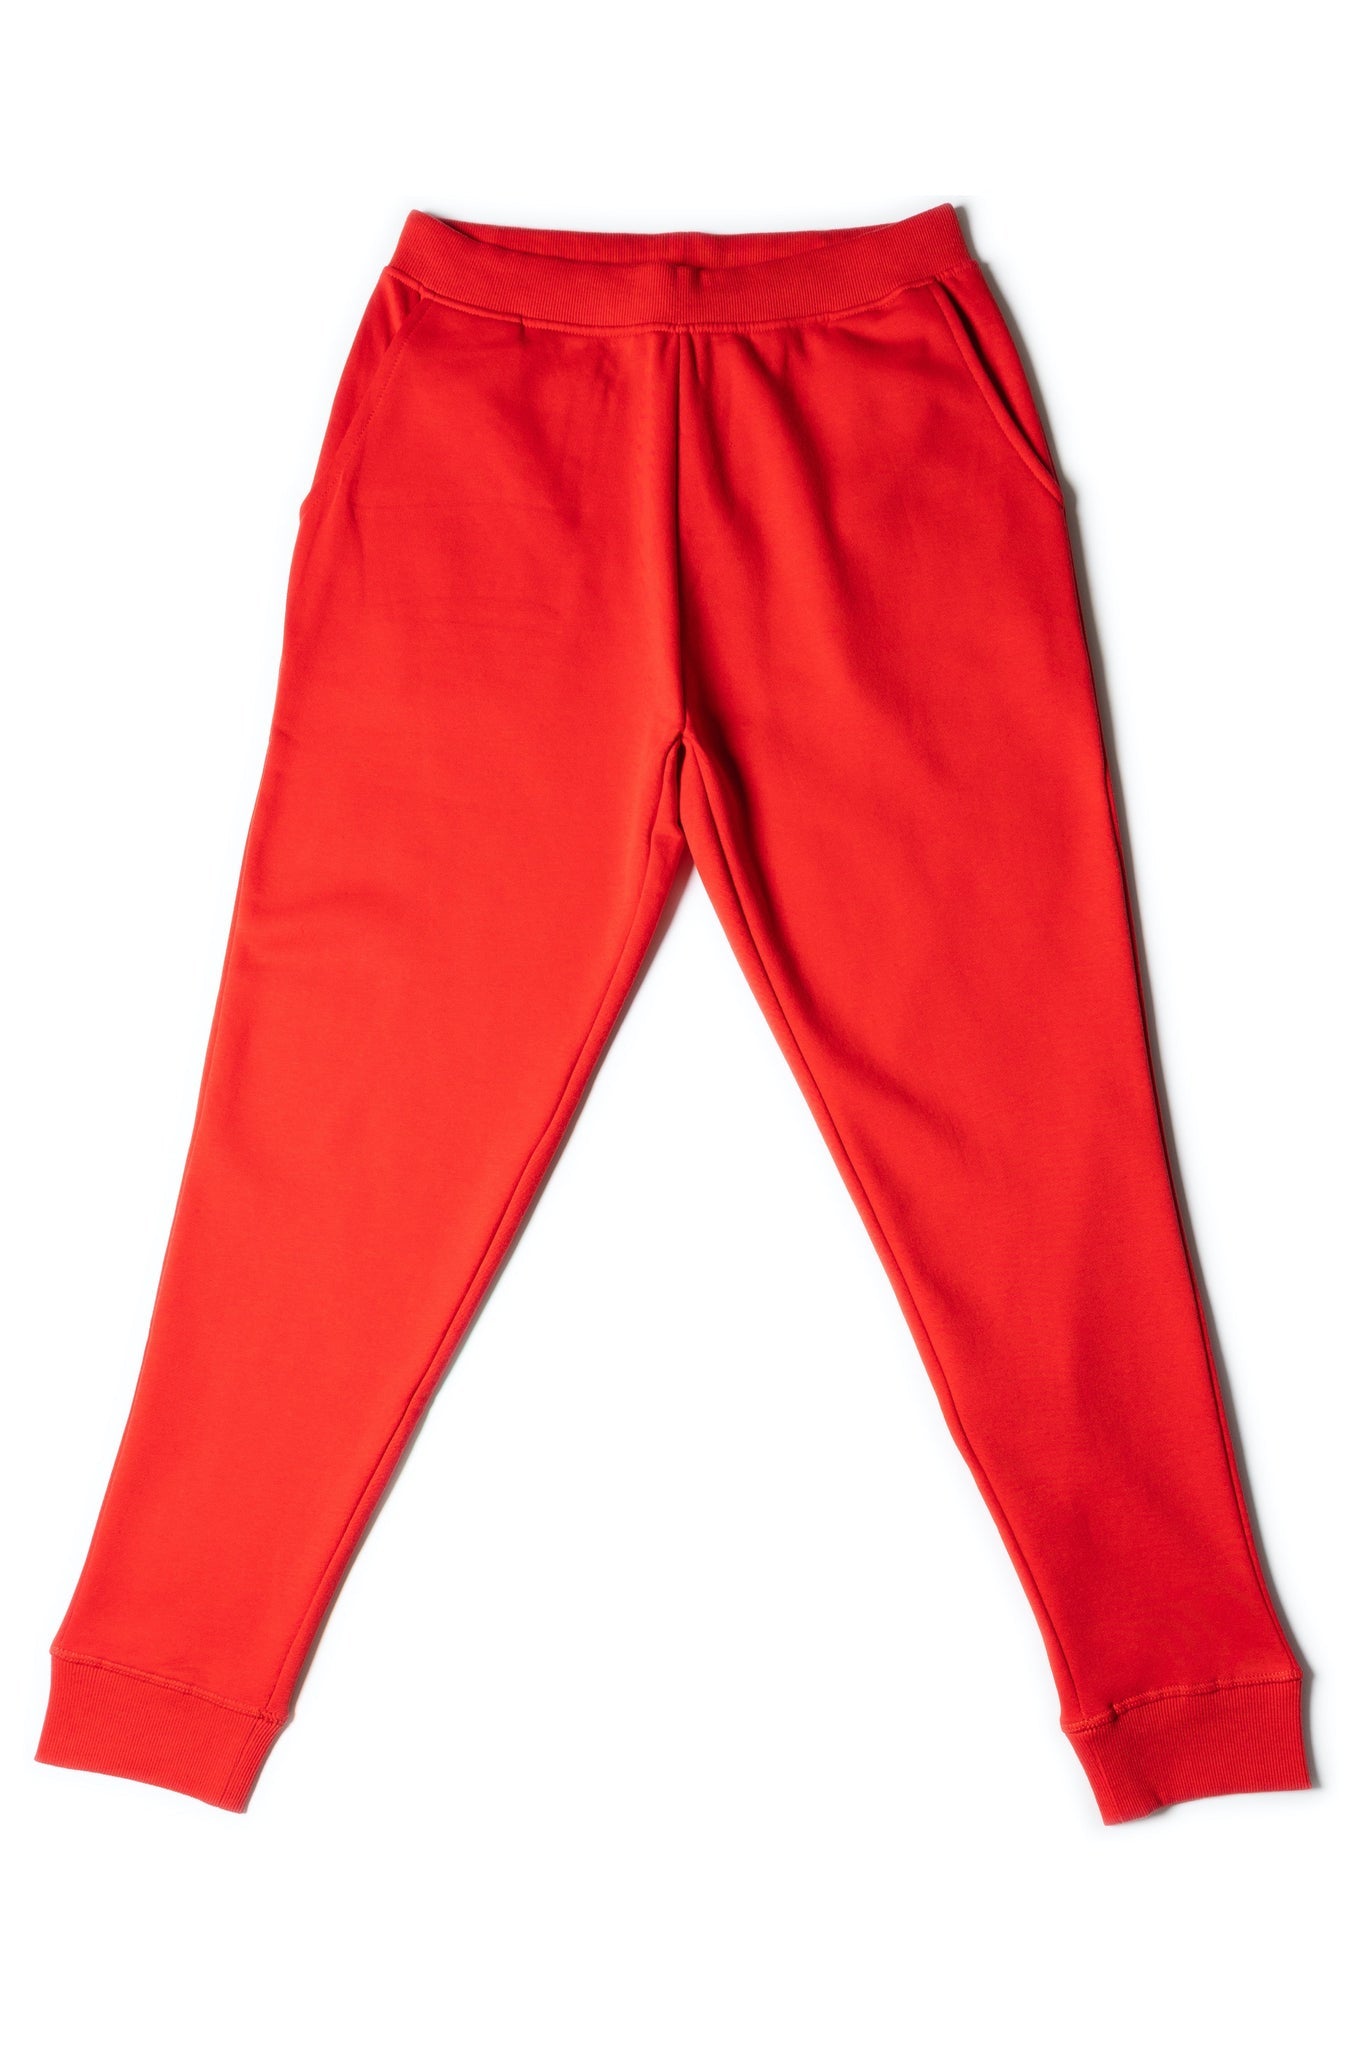 HERO - 5020R Unisex Joggers - Red (Relaxed Fit)